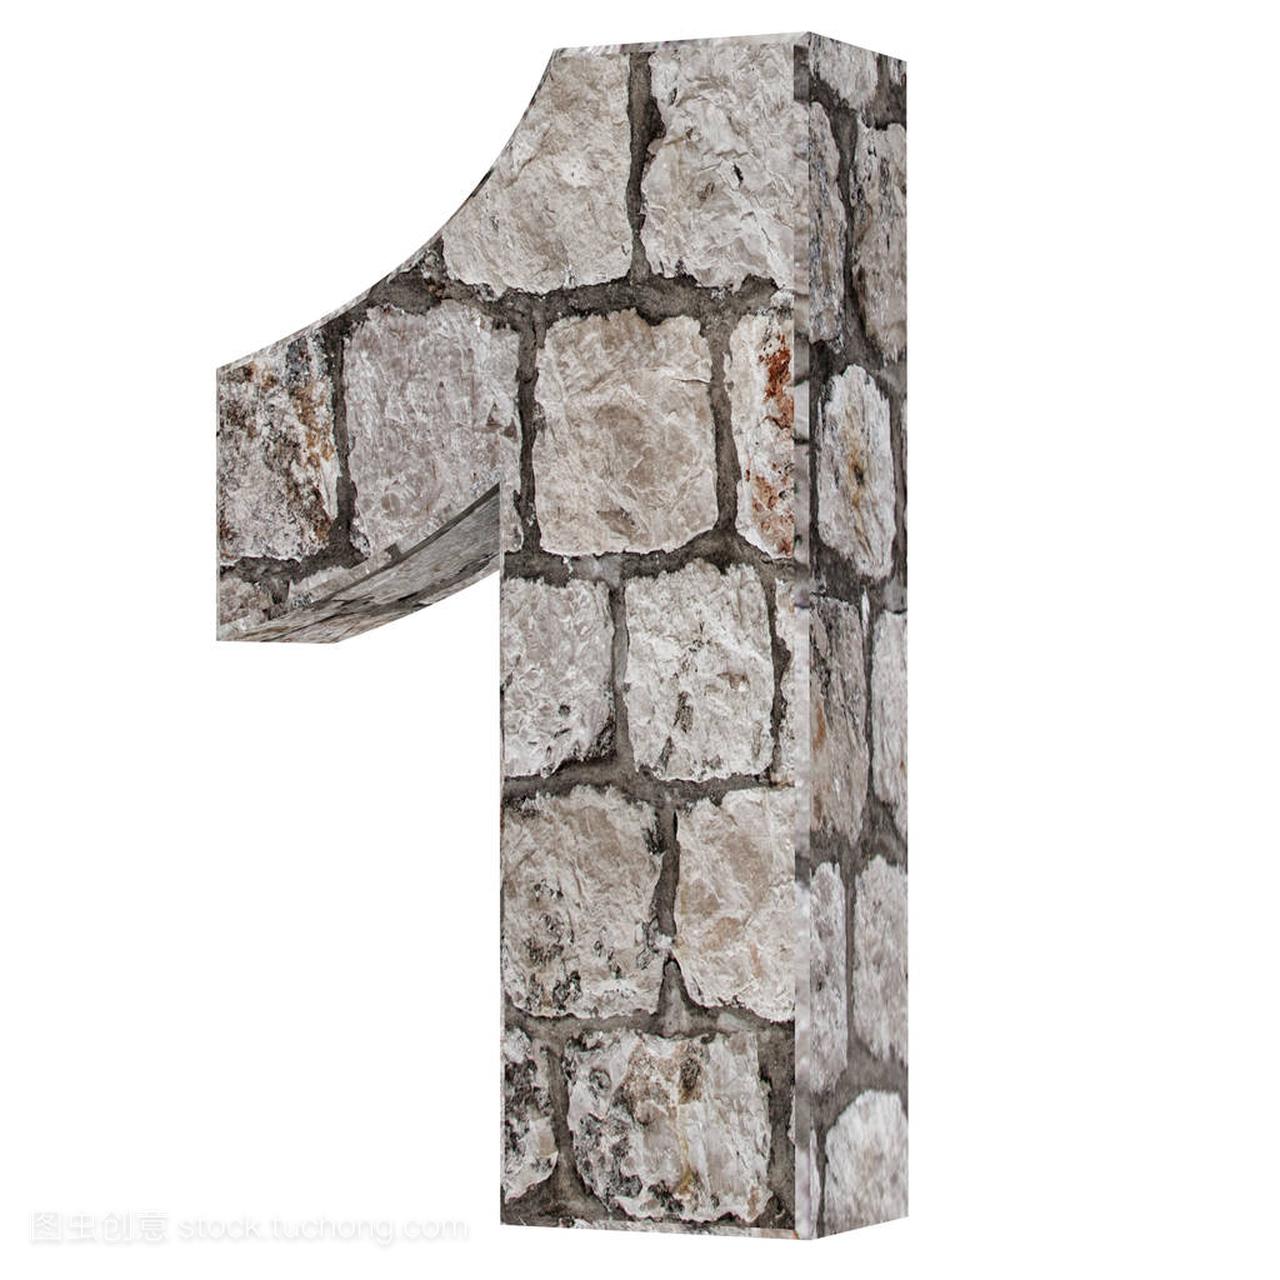 The number one - 1 of stone bricks. 3D Render